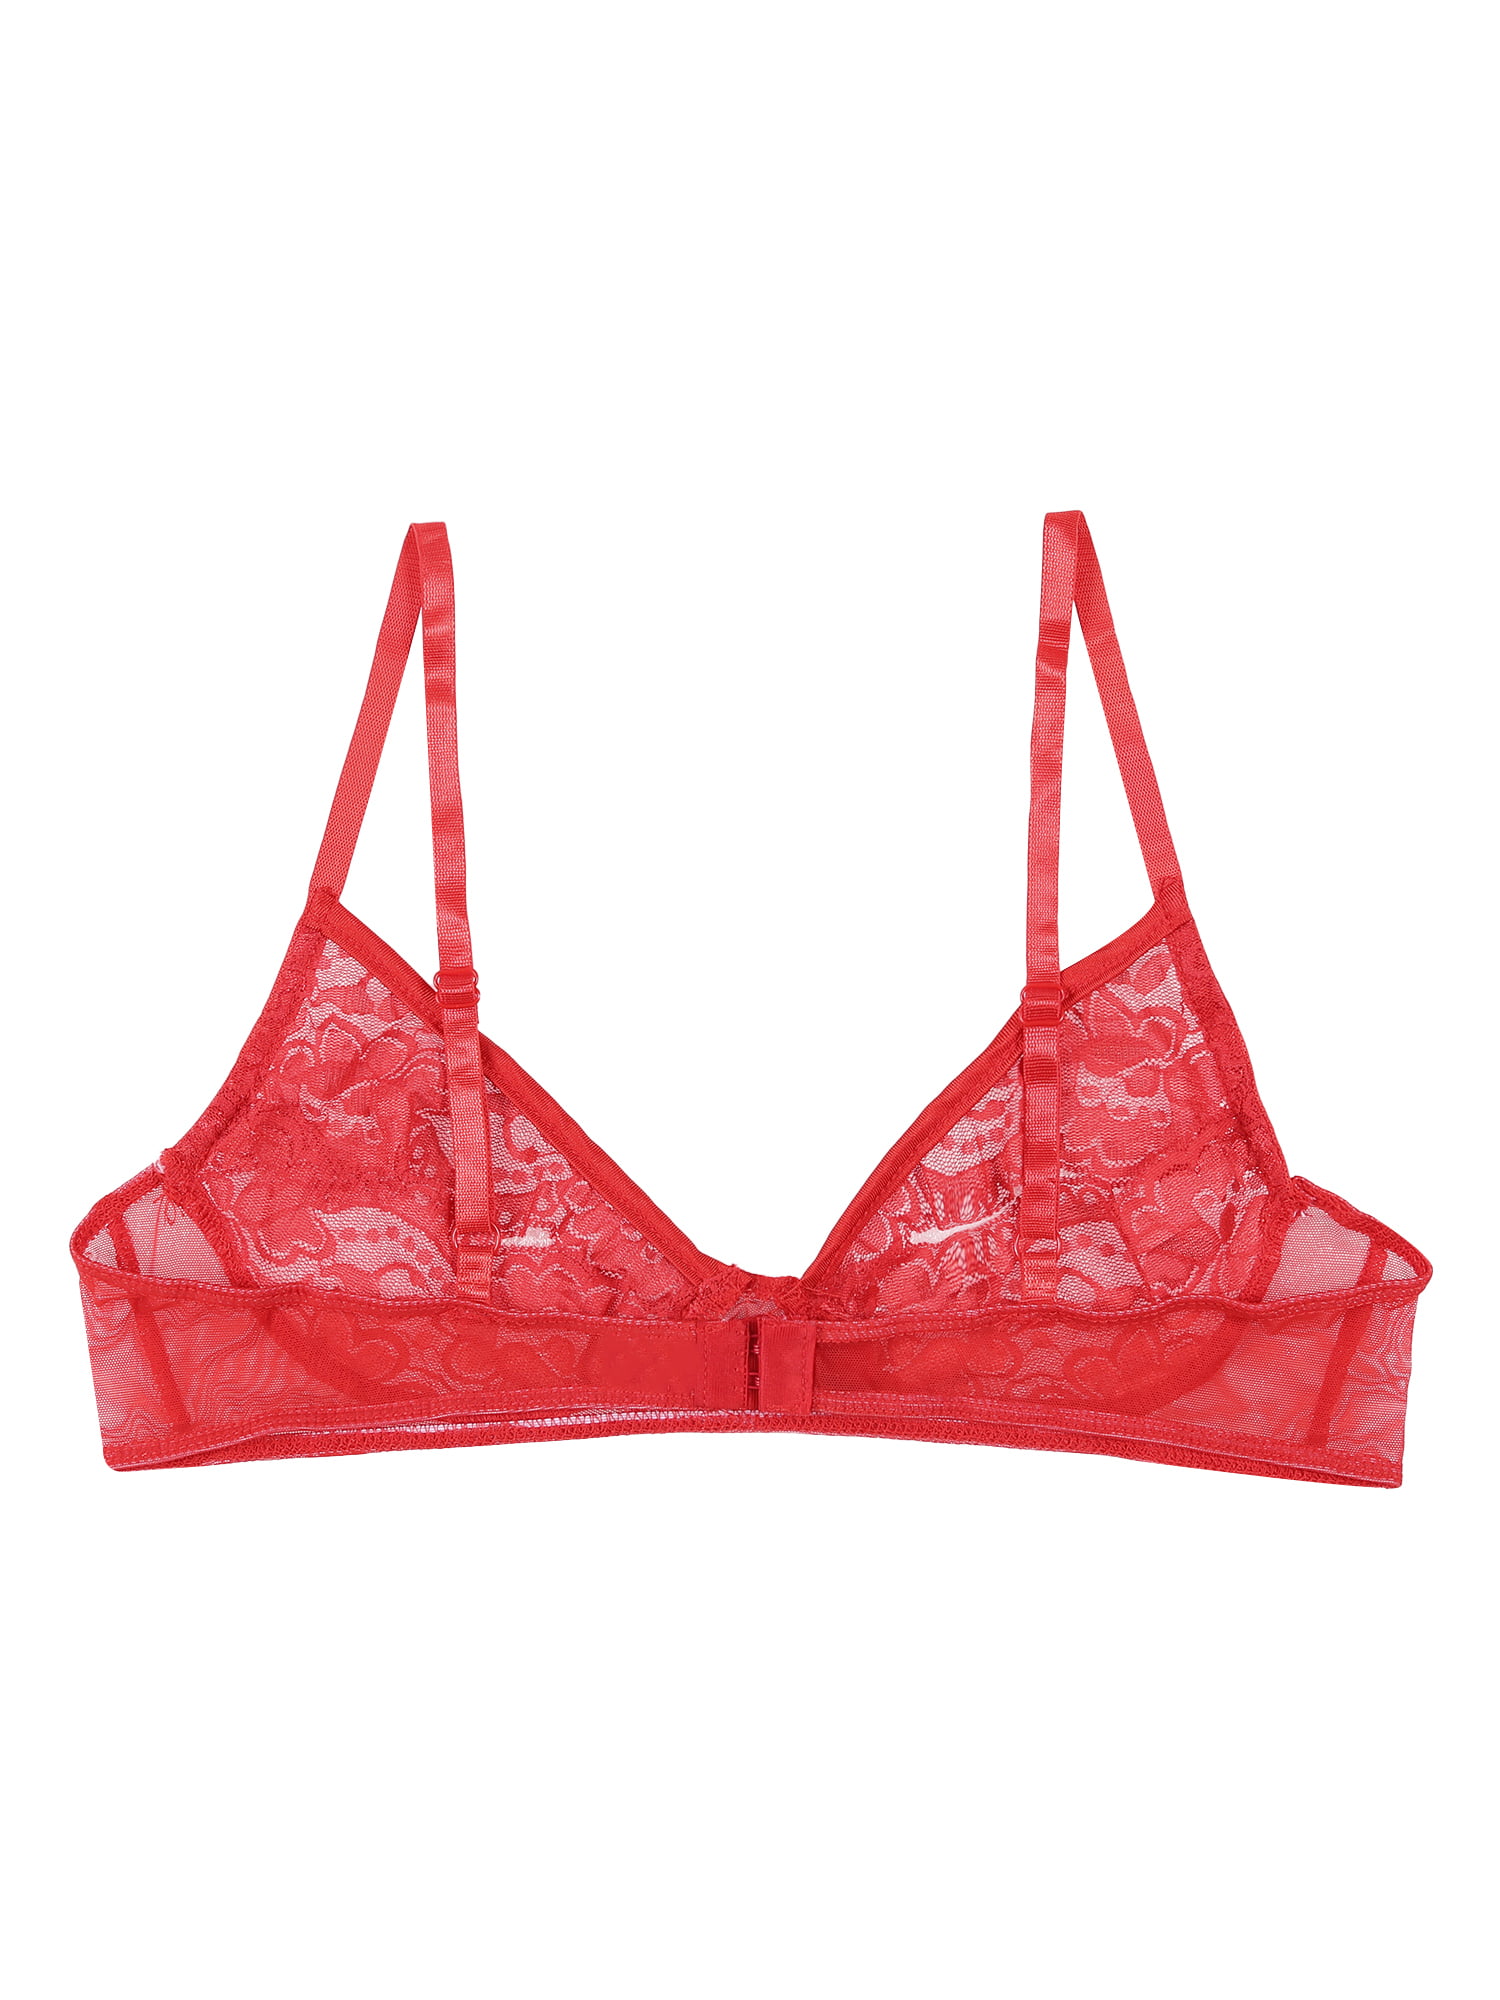 DPOIS Womens Sheer Floral Lace Hollow Out Nipple Bra Top Red 3XL